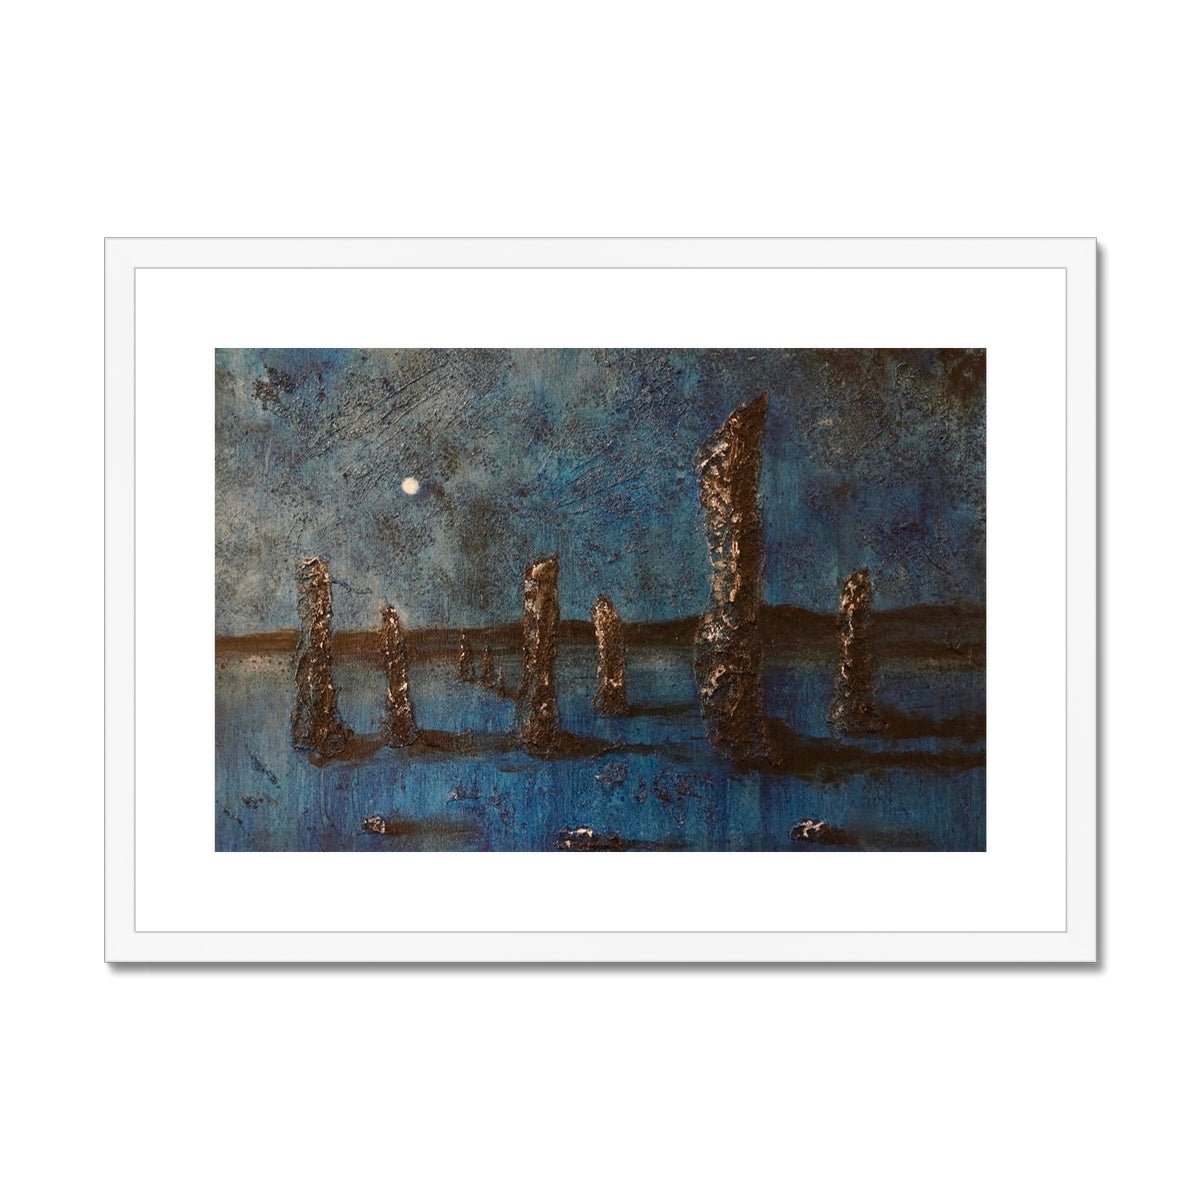 Callanish Moonlight Lewis Painting | Framed & Mounted Prints From Scotland-Framed & Mounted Prints-Hebridean Islands Art Gallery-A2 Landscape-White Frame-Paintings, Prints, Homeware, Art Gifts From Scotland By Scottish Artist Kevin Hunter